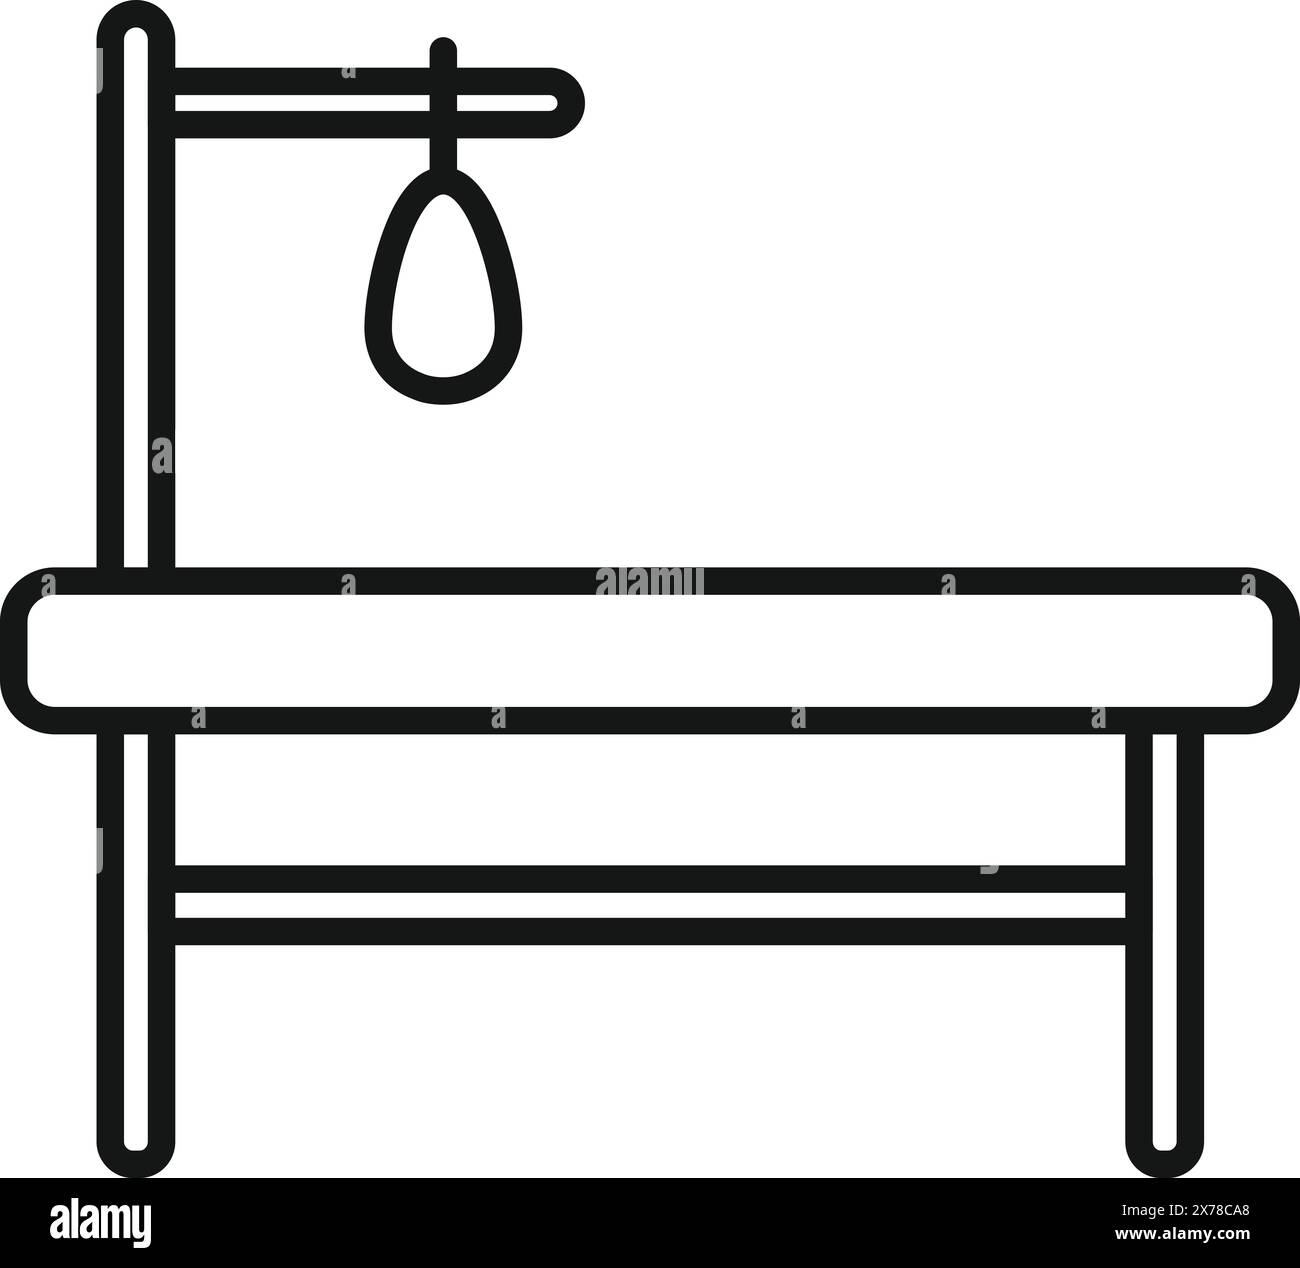 Minimalist gallows icon design with simple black and white illustration of hanging noose, representing capital punishment and historical judicial system, in a monochrome vector outline silhouette Stock Vector